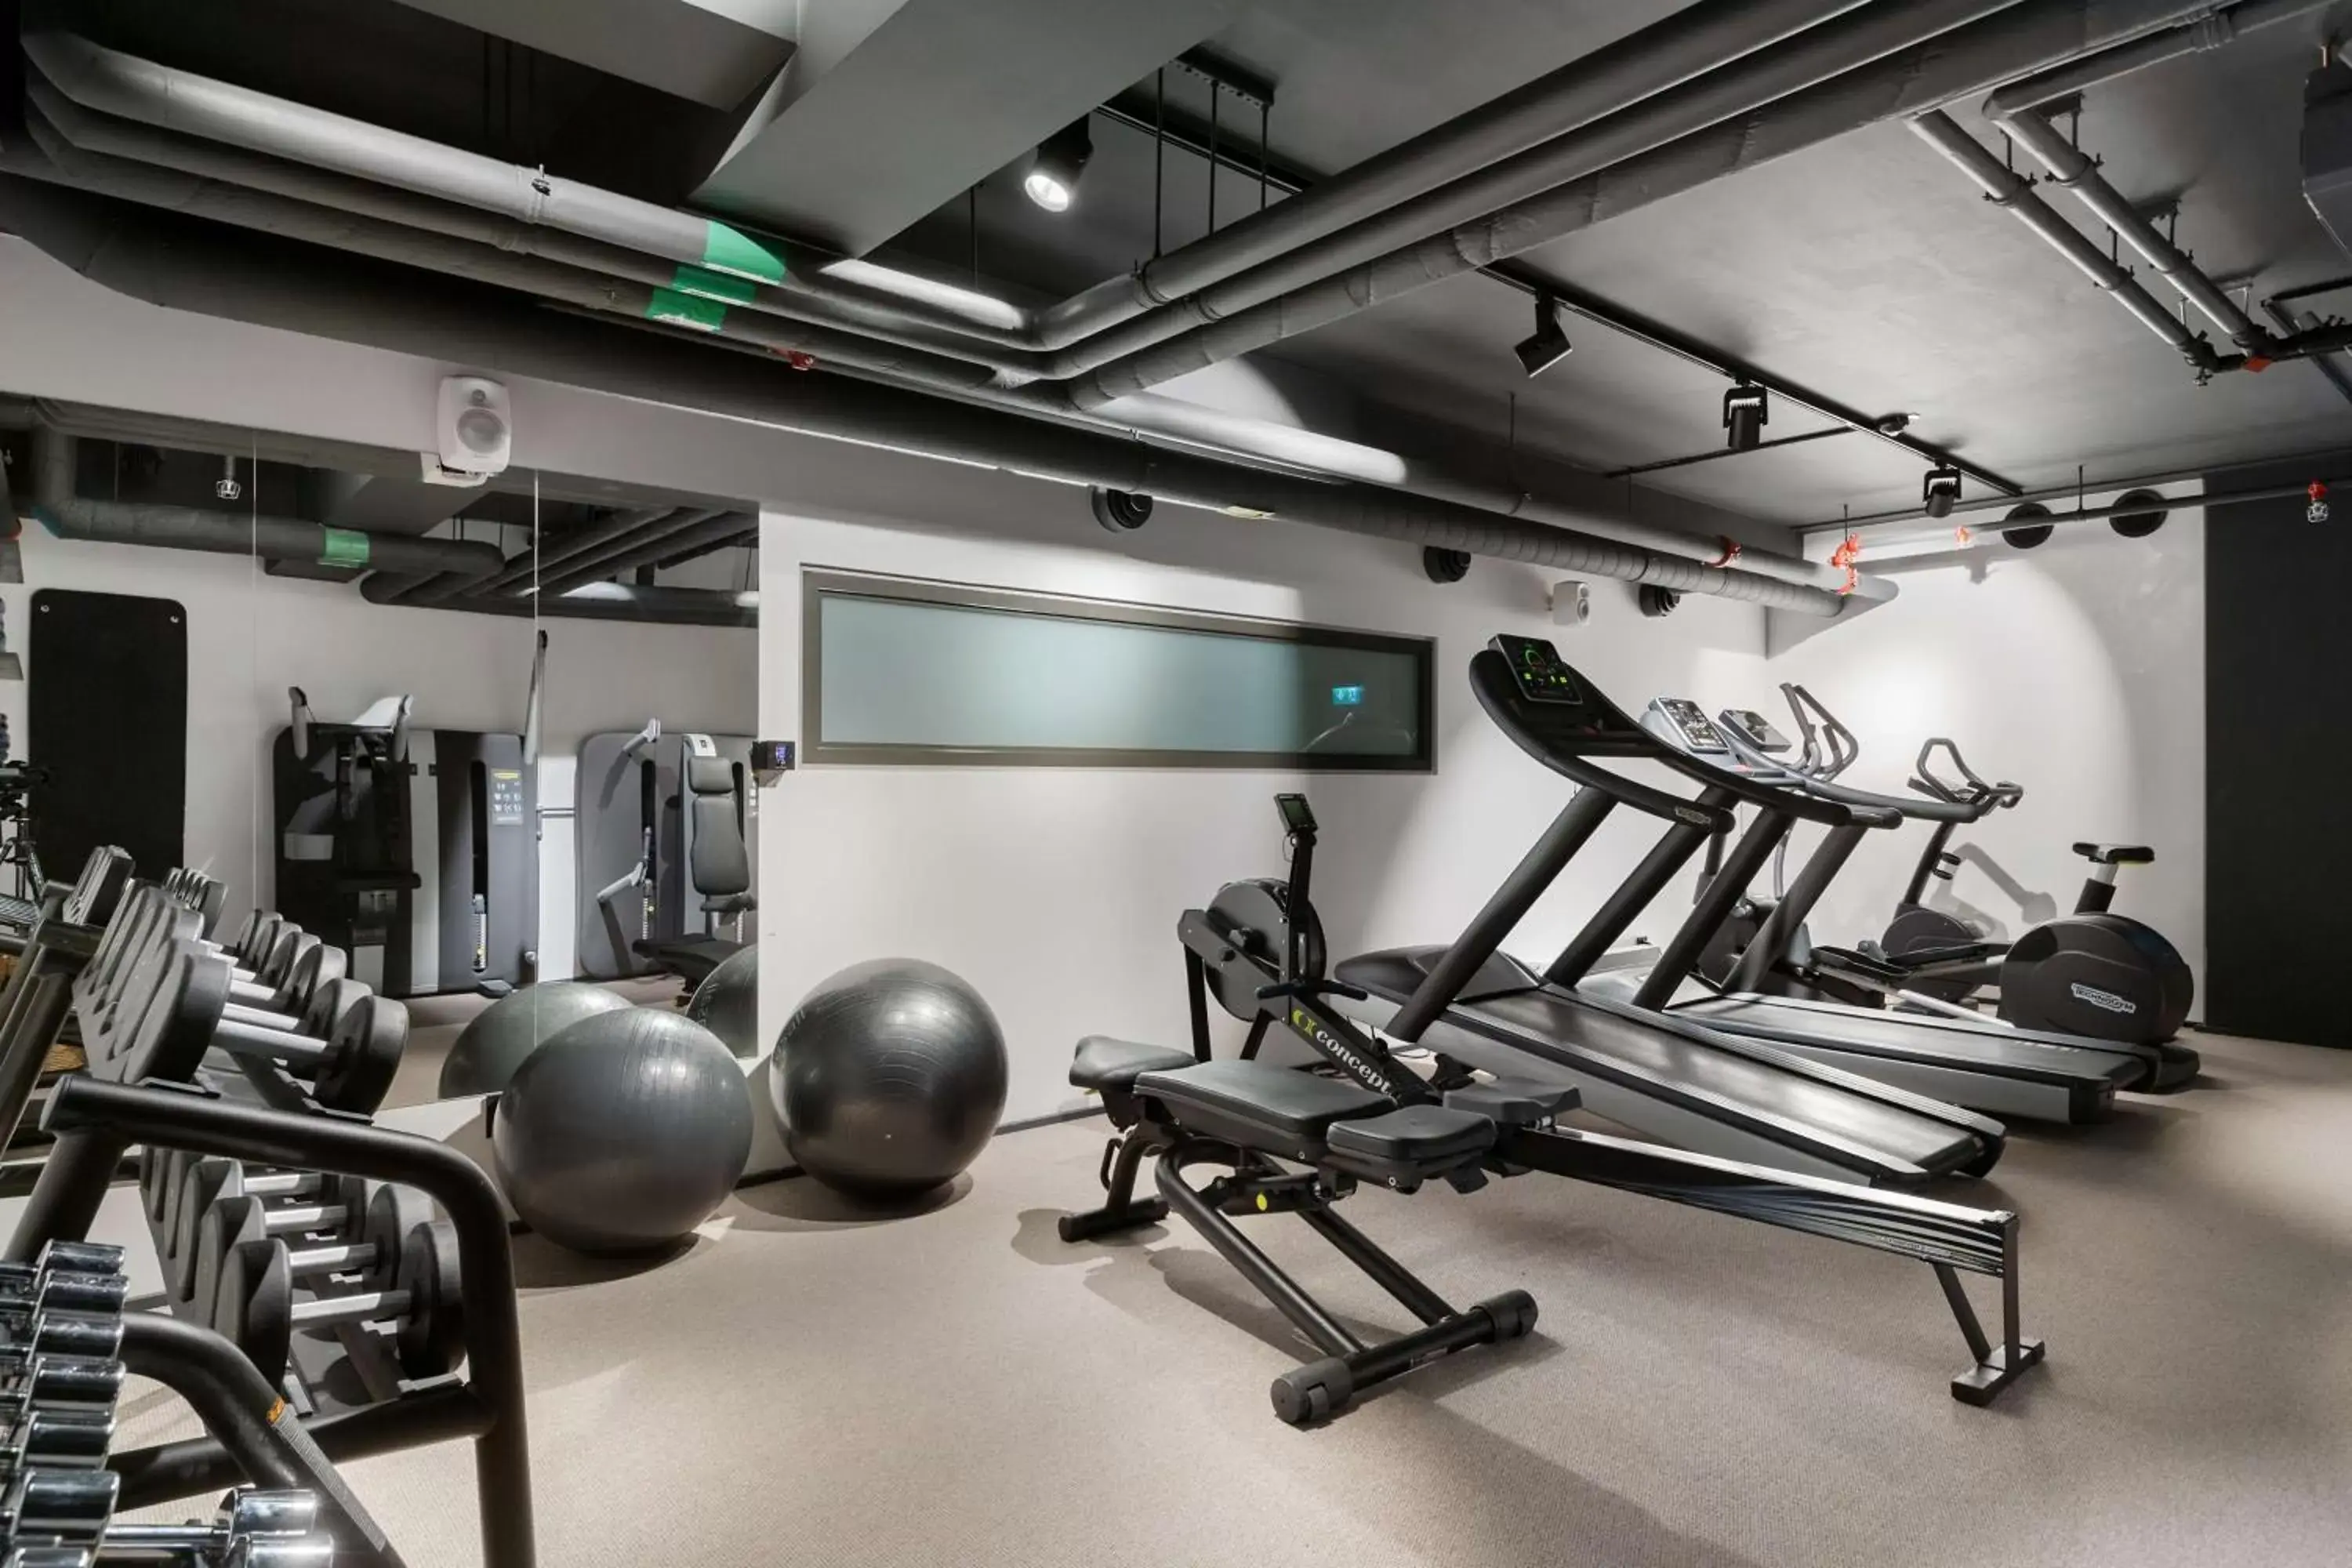 Fitness centre/facilities, Fitness Center/Facilities in The Winery Hotel, WorldHotels Crafted